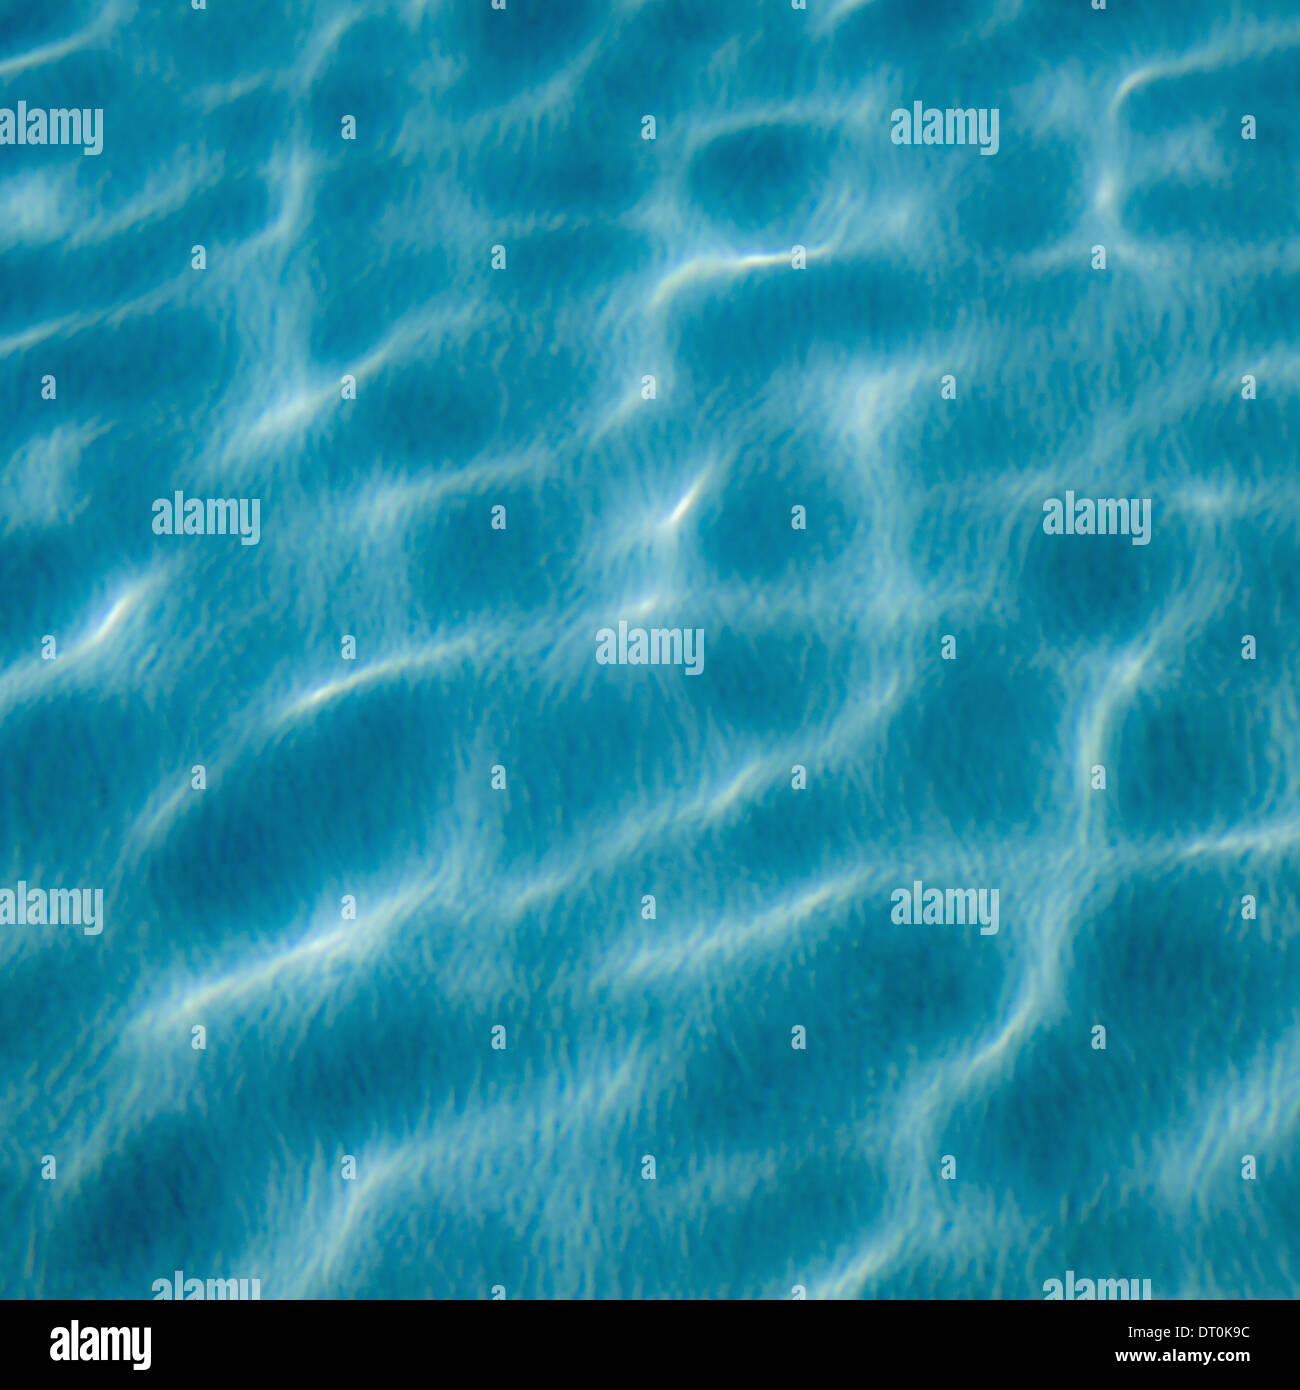 Seattle Washington USA water surface of pool Reflections and ripples Stock Photo